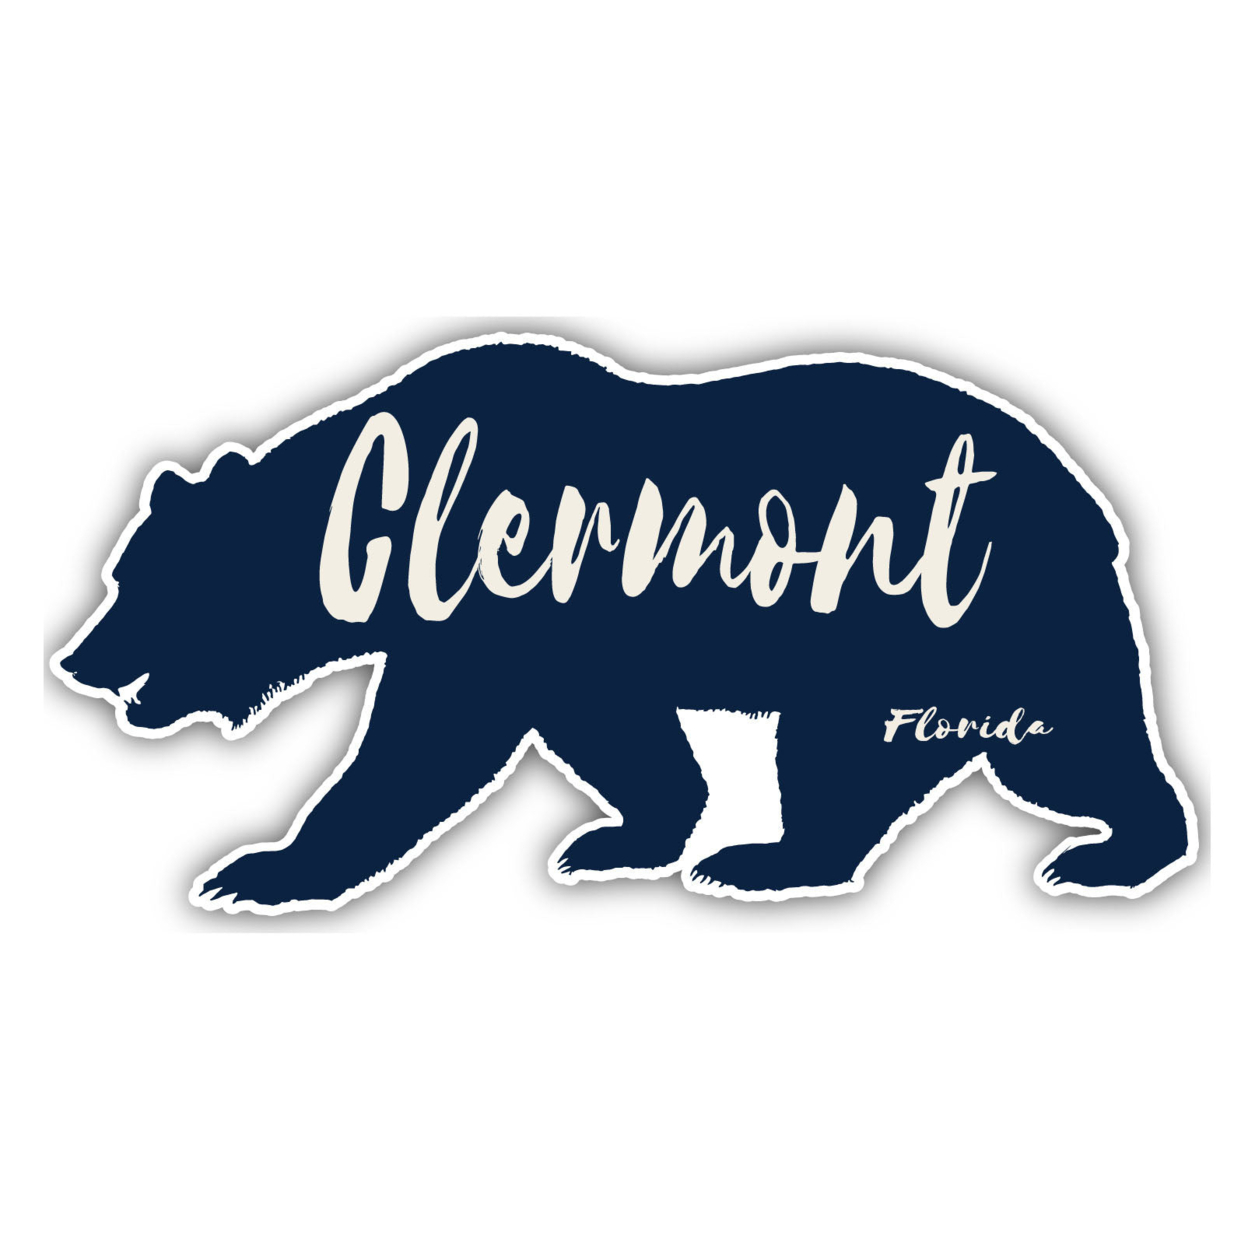 Clermont Florida Souvenir Decorative Stickers (Choose Theme And Size) - 4-Pack, 8-Inch, Bear